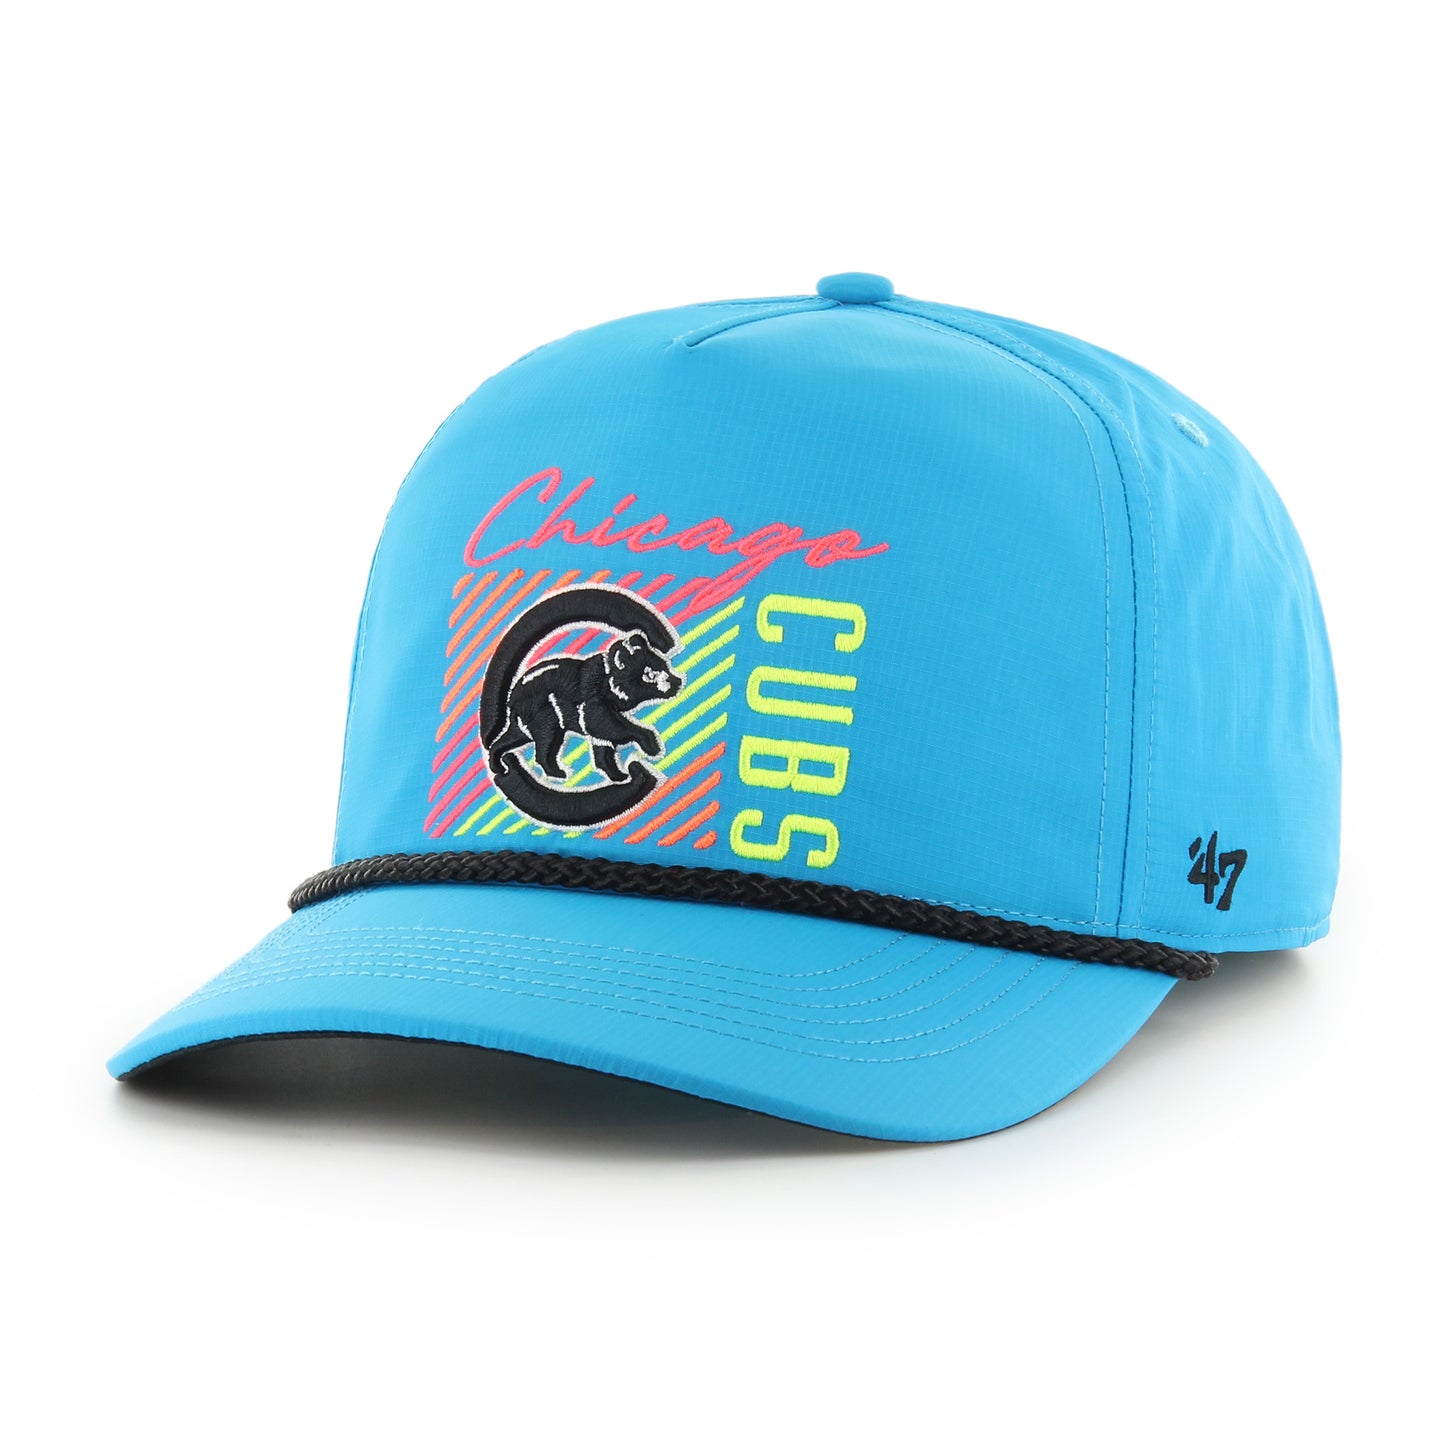 Chicago Cubs Blue Neon Highlight 47' Hitch Adjustable Hat